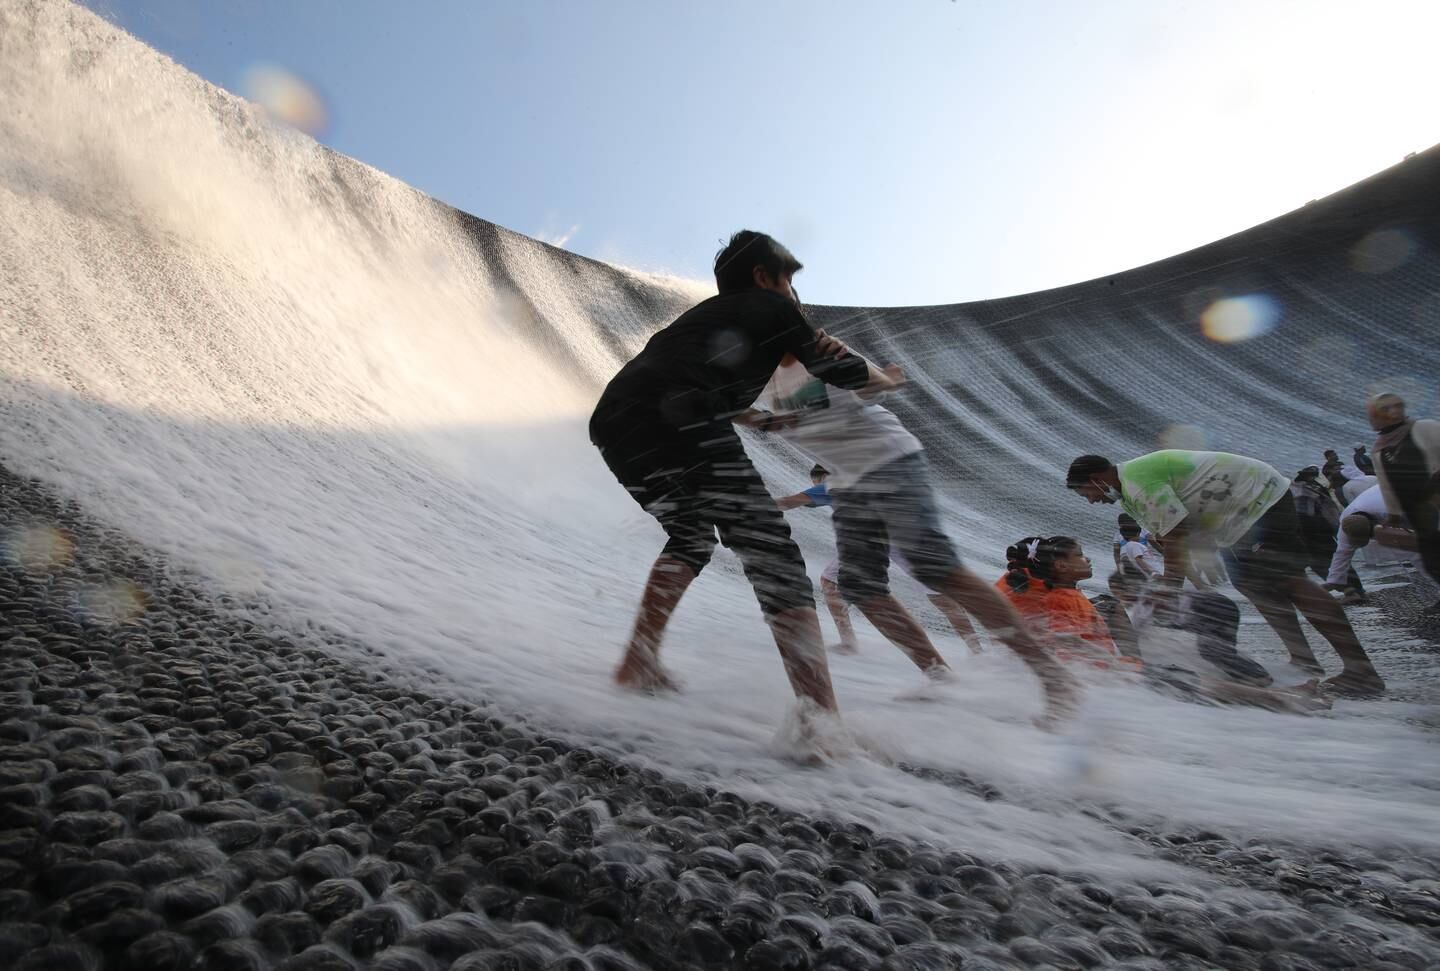 People enjoy their time at the Surreal waterfall at Expo 2020 Dubai. Photo: EPA 